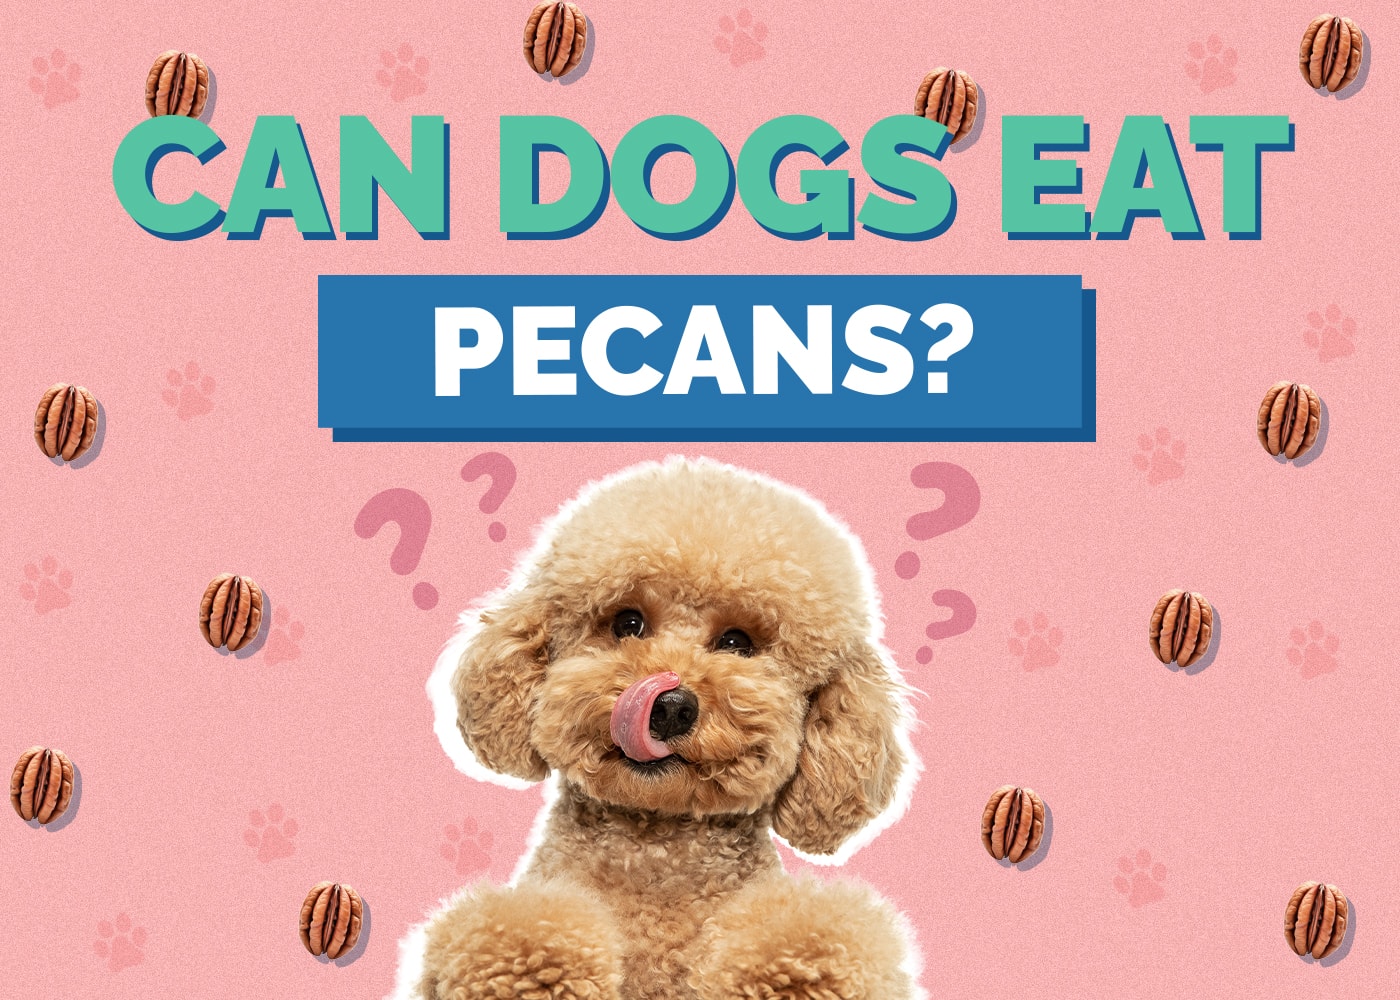 Can Dogs Eat pecans